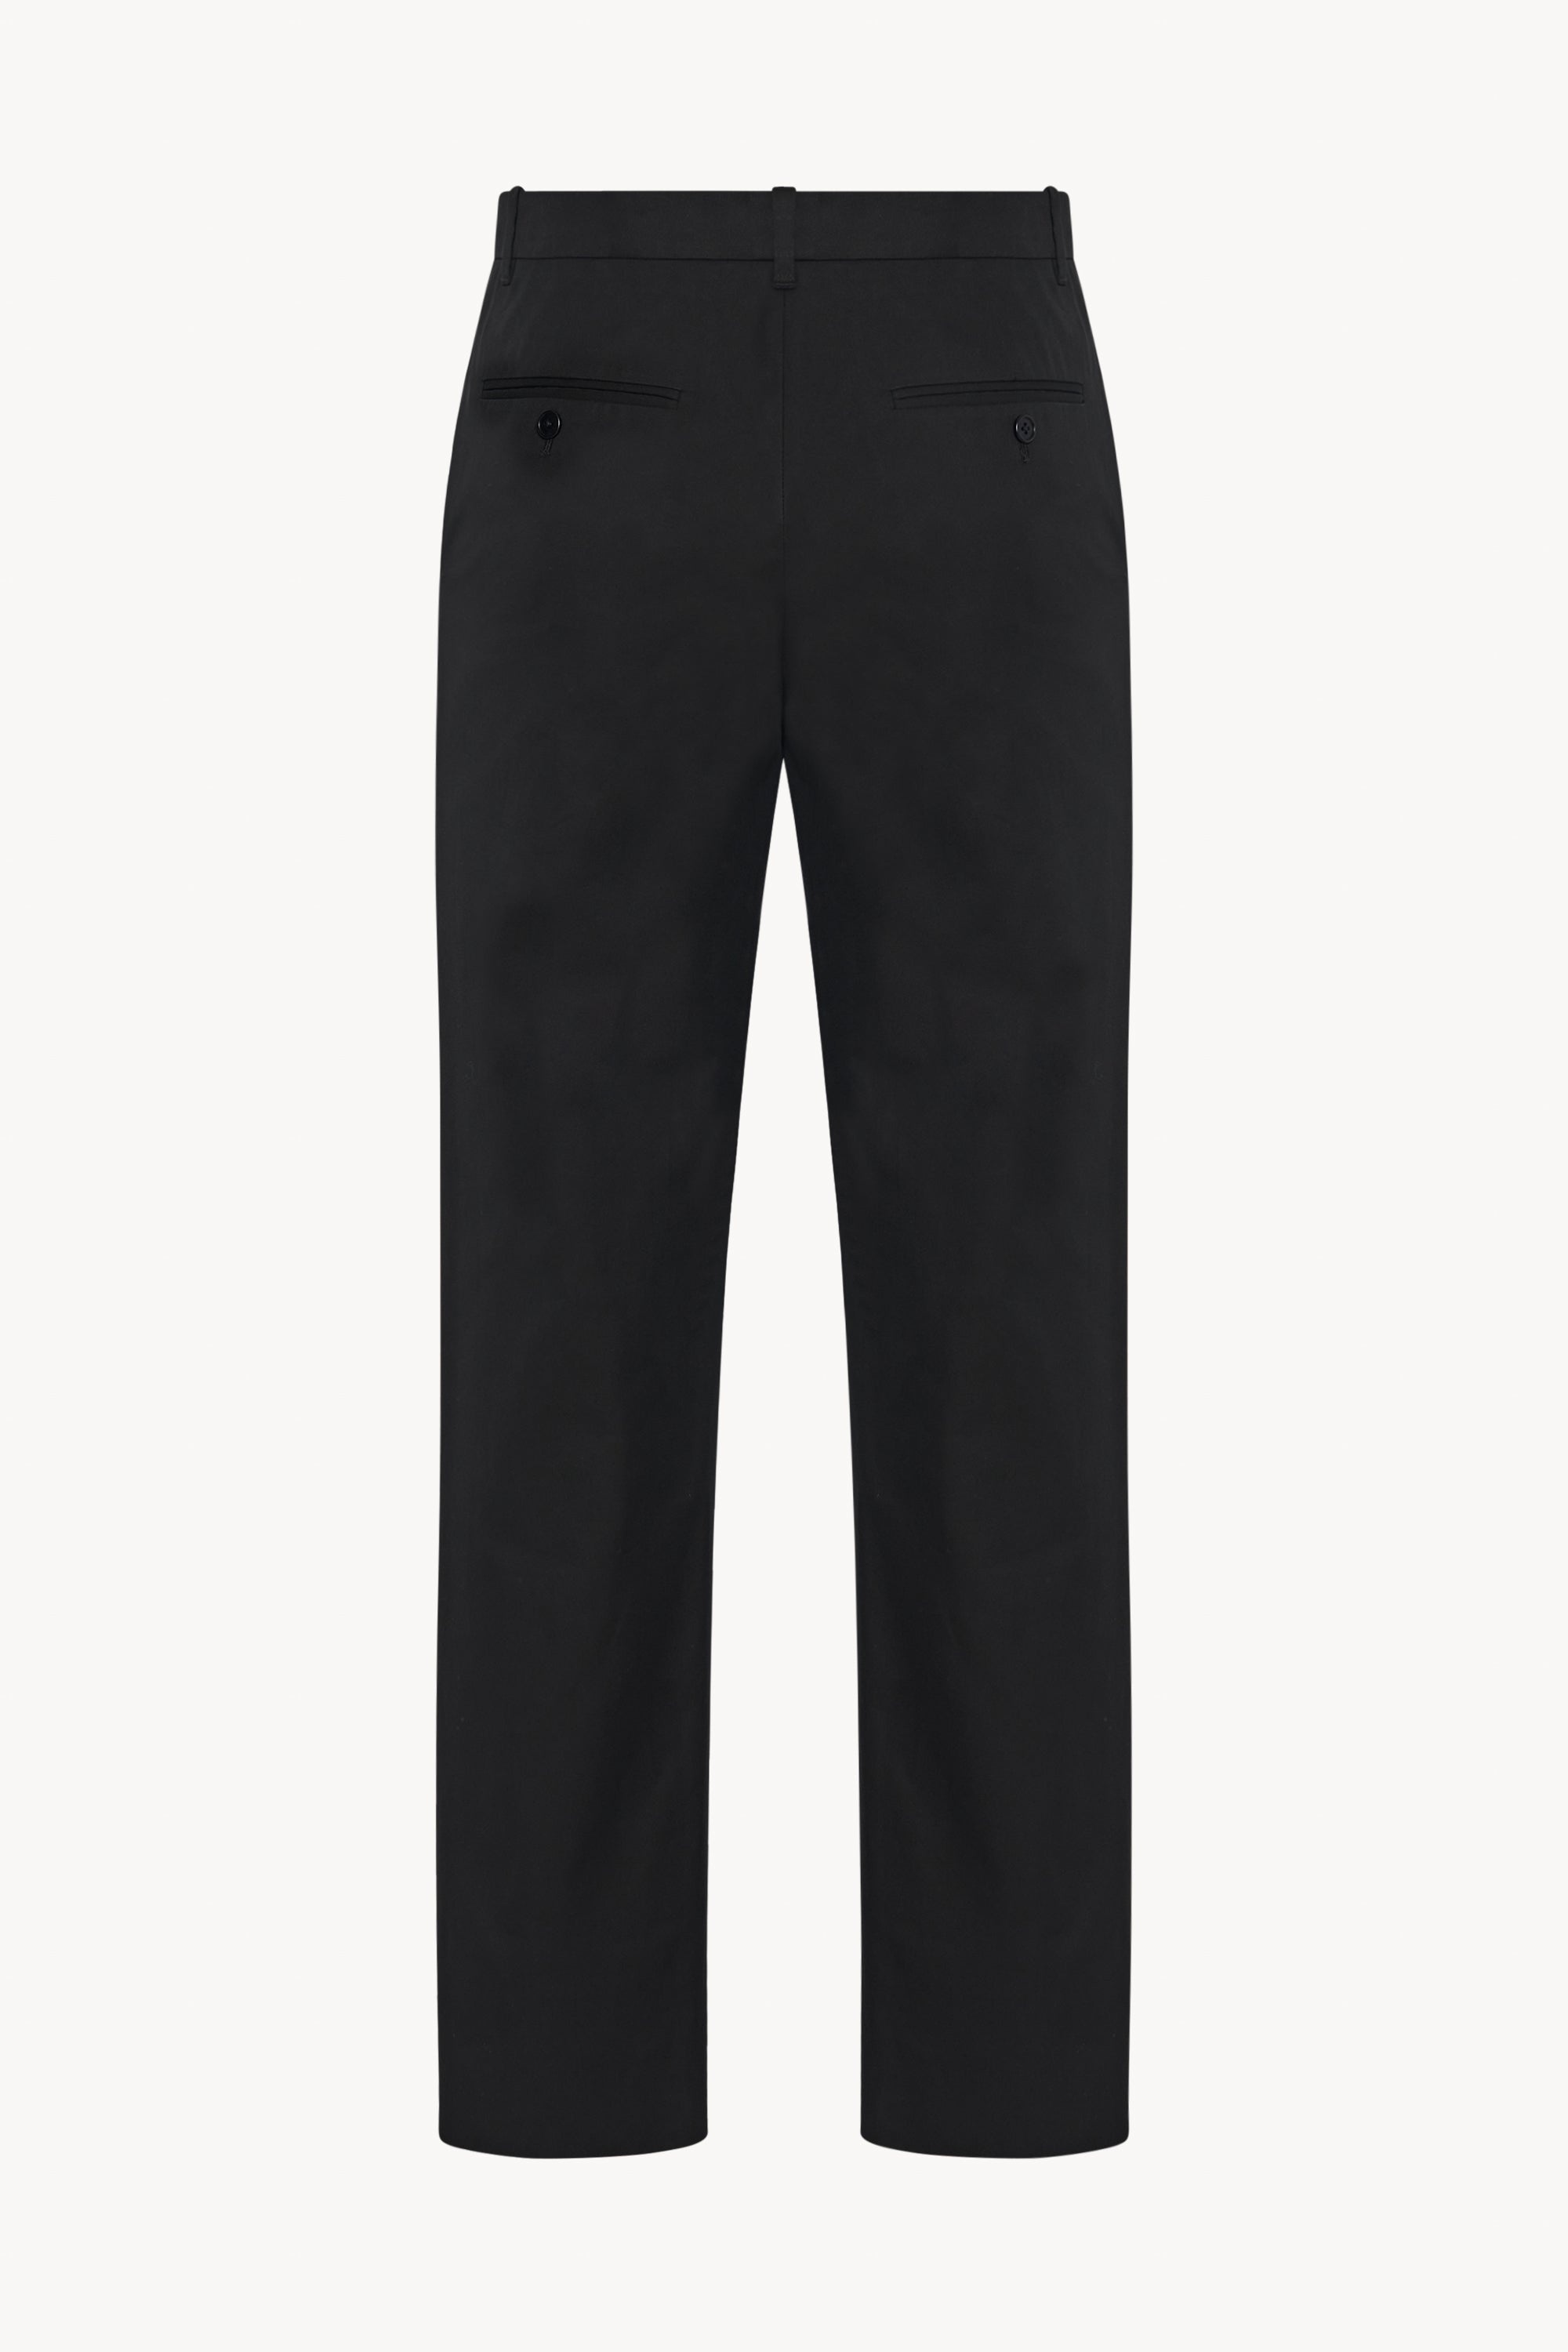 Wesson Pant in Cotton - 2